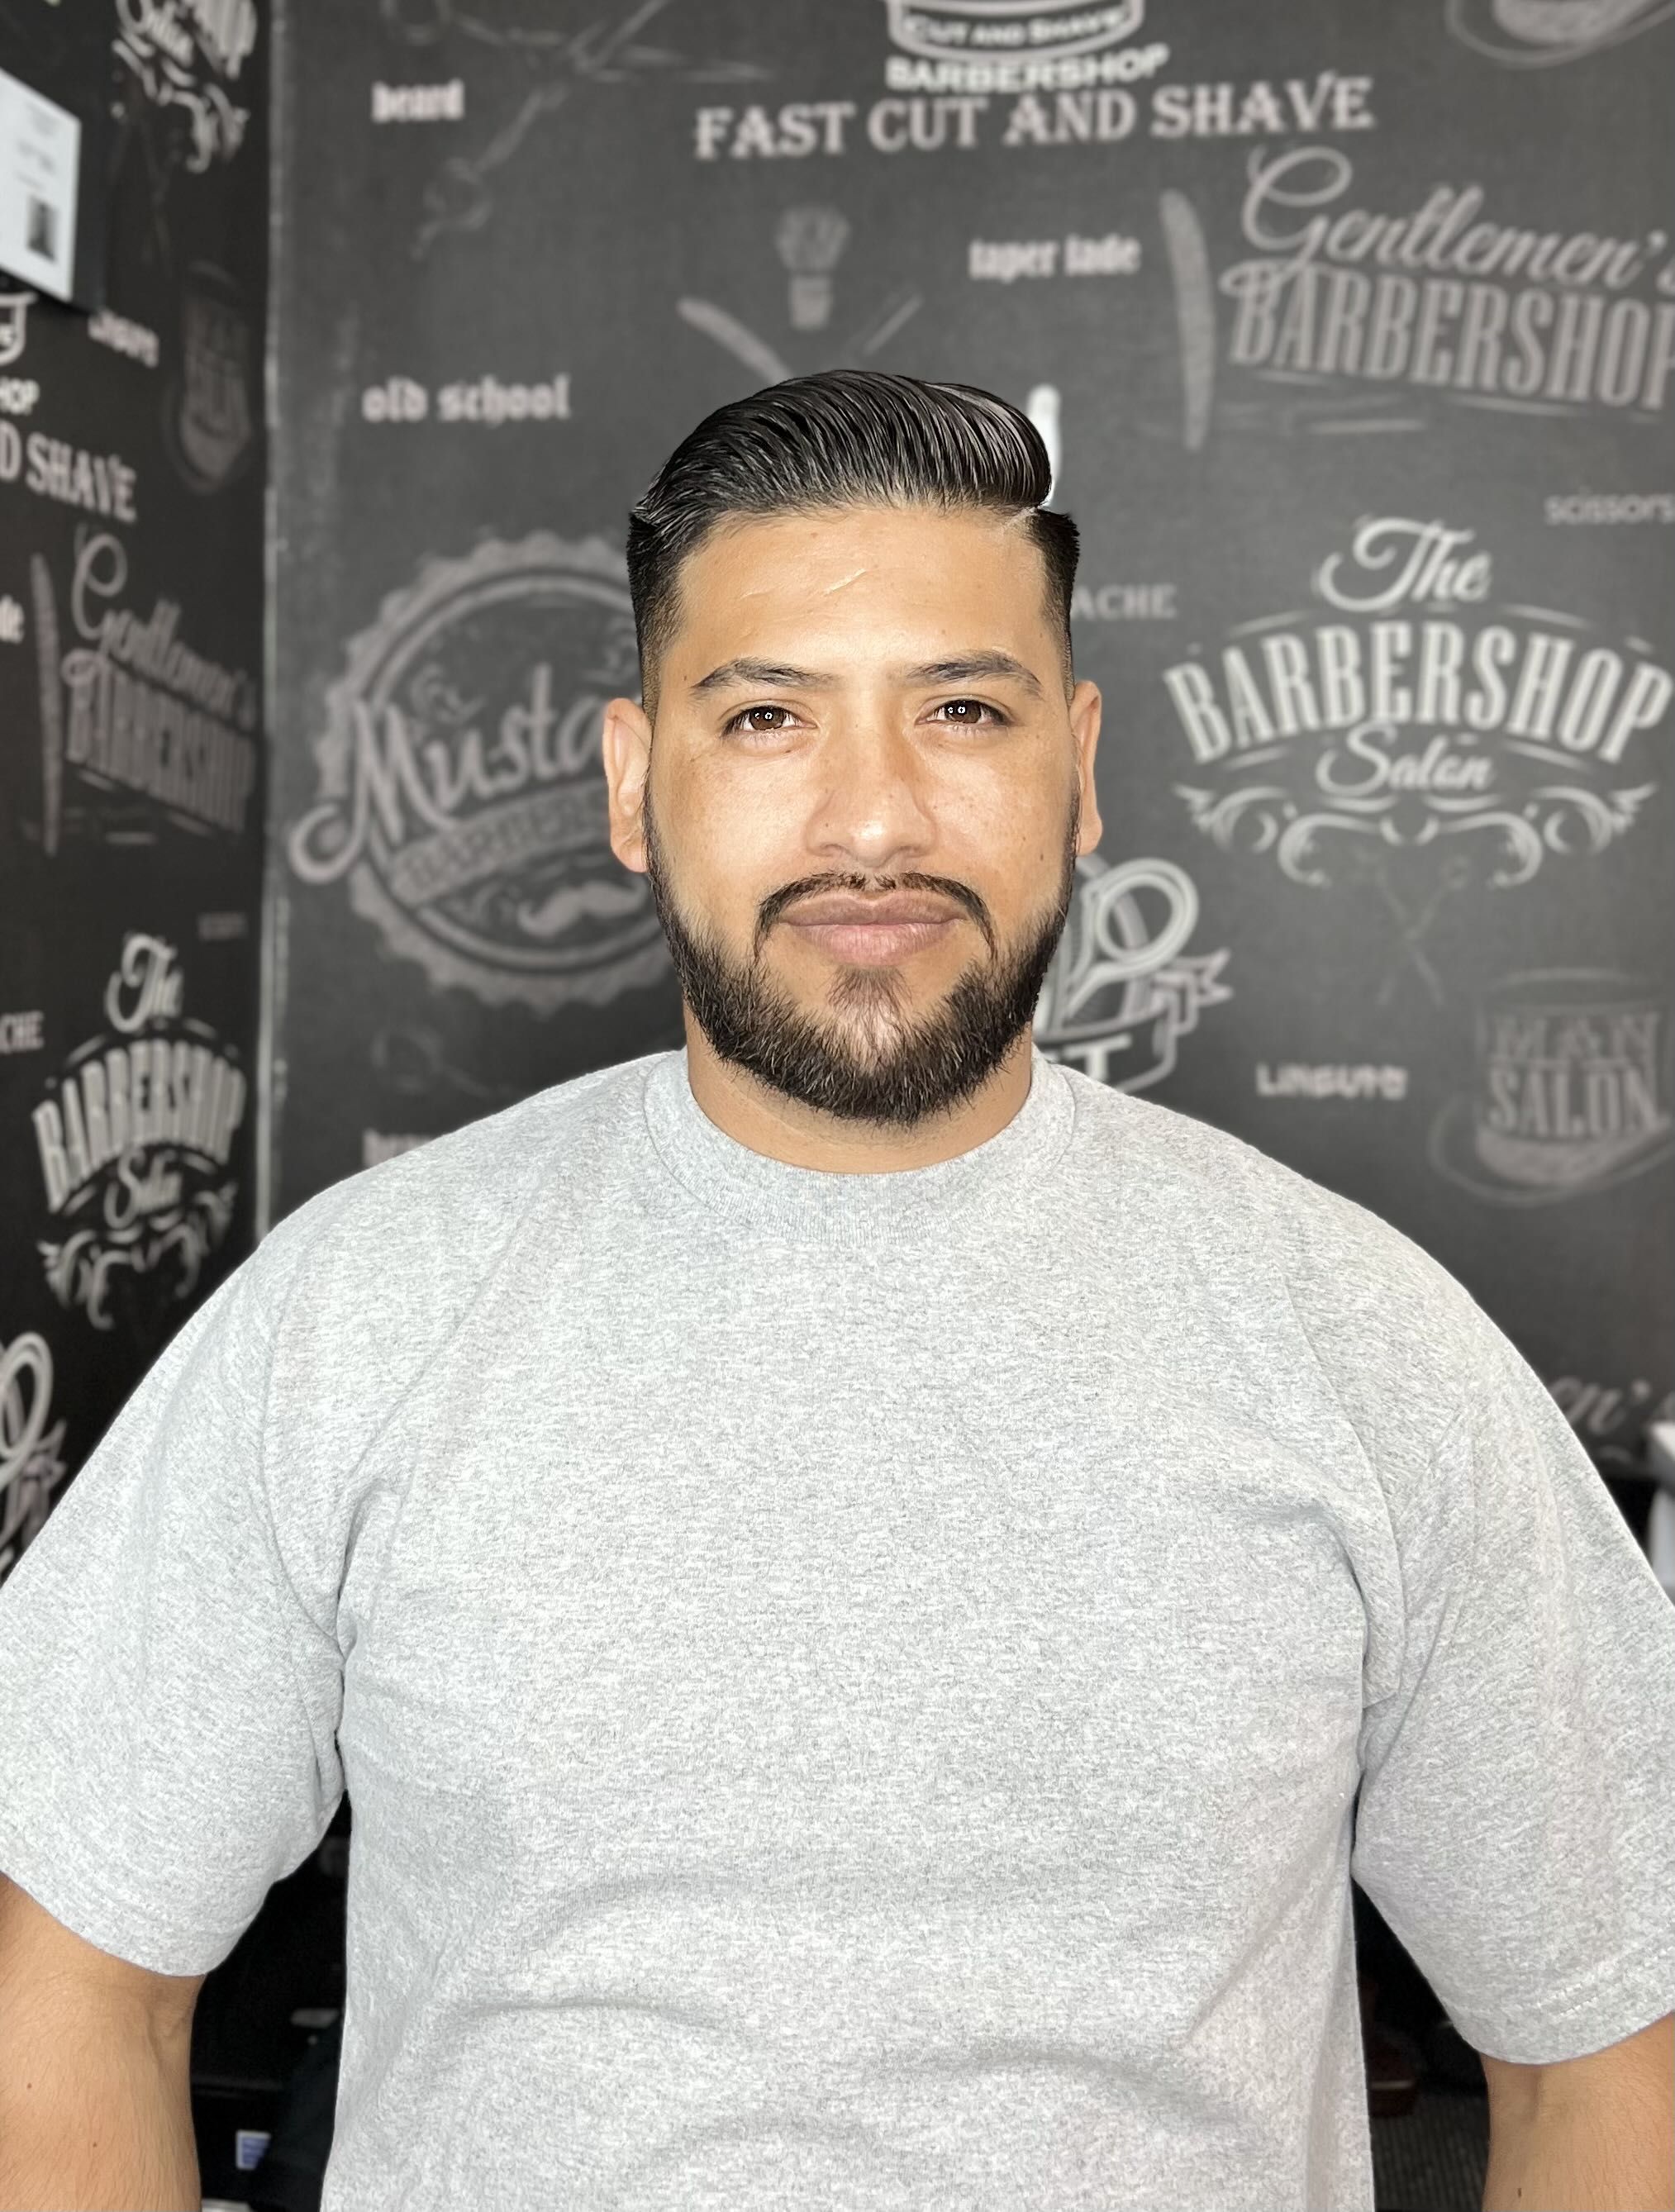 Tony - Fast cut and shave barbershop